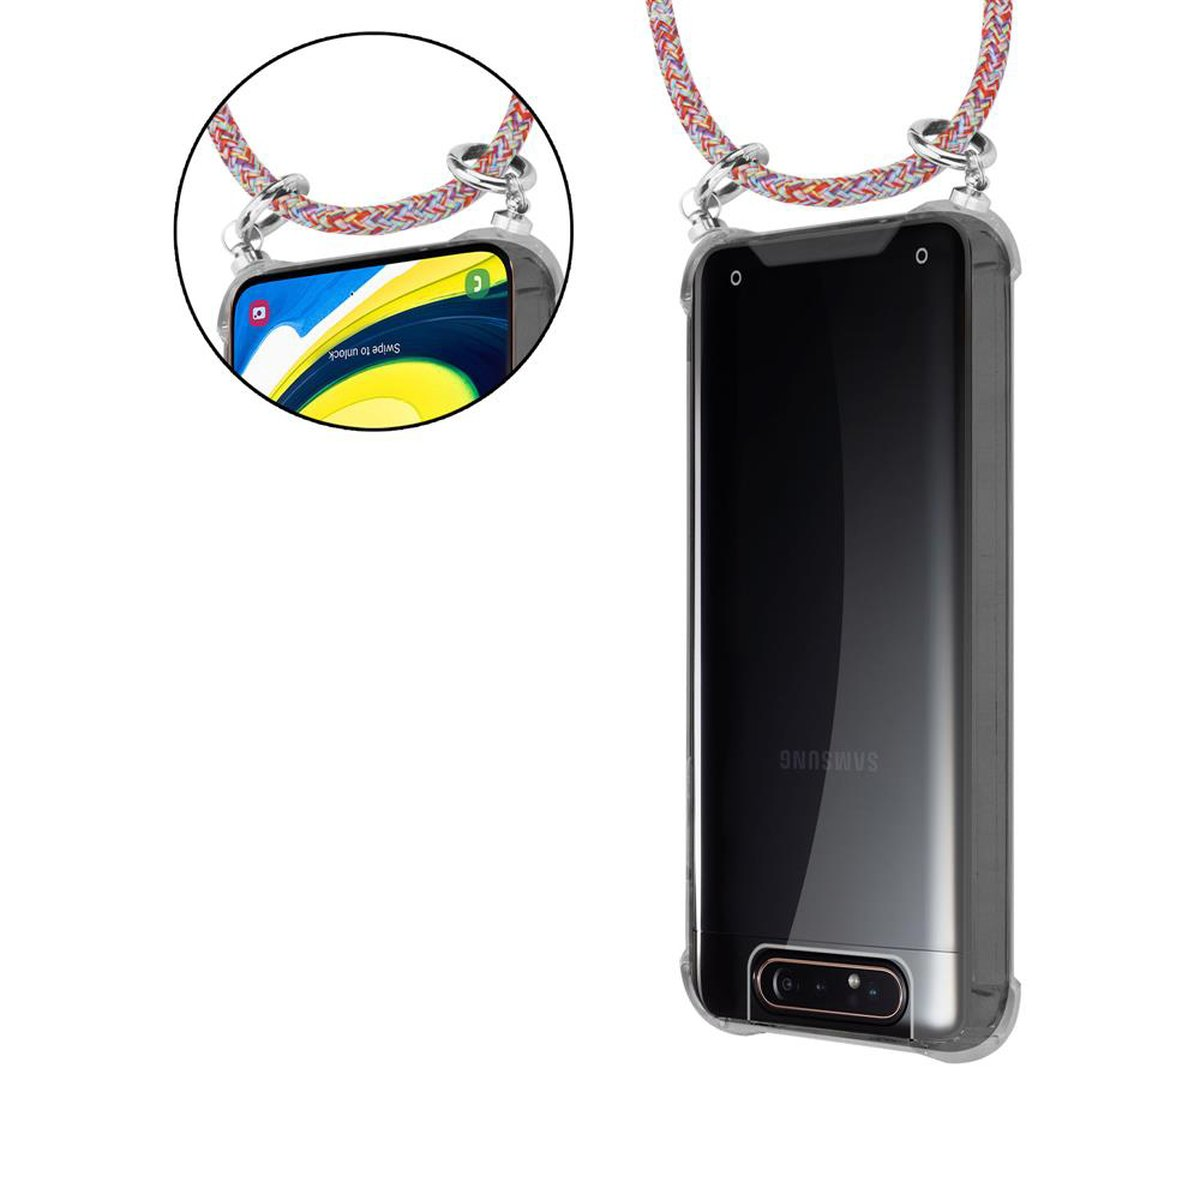 A90 und Silber Ringen, COLORFUL CADORABO Samsung, Kette mit Kordel abnehmbarer 4G, A80 Hülle, Backcover, Galaxy Handy / PARROT Band